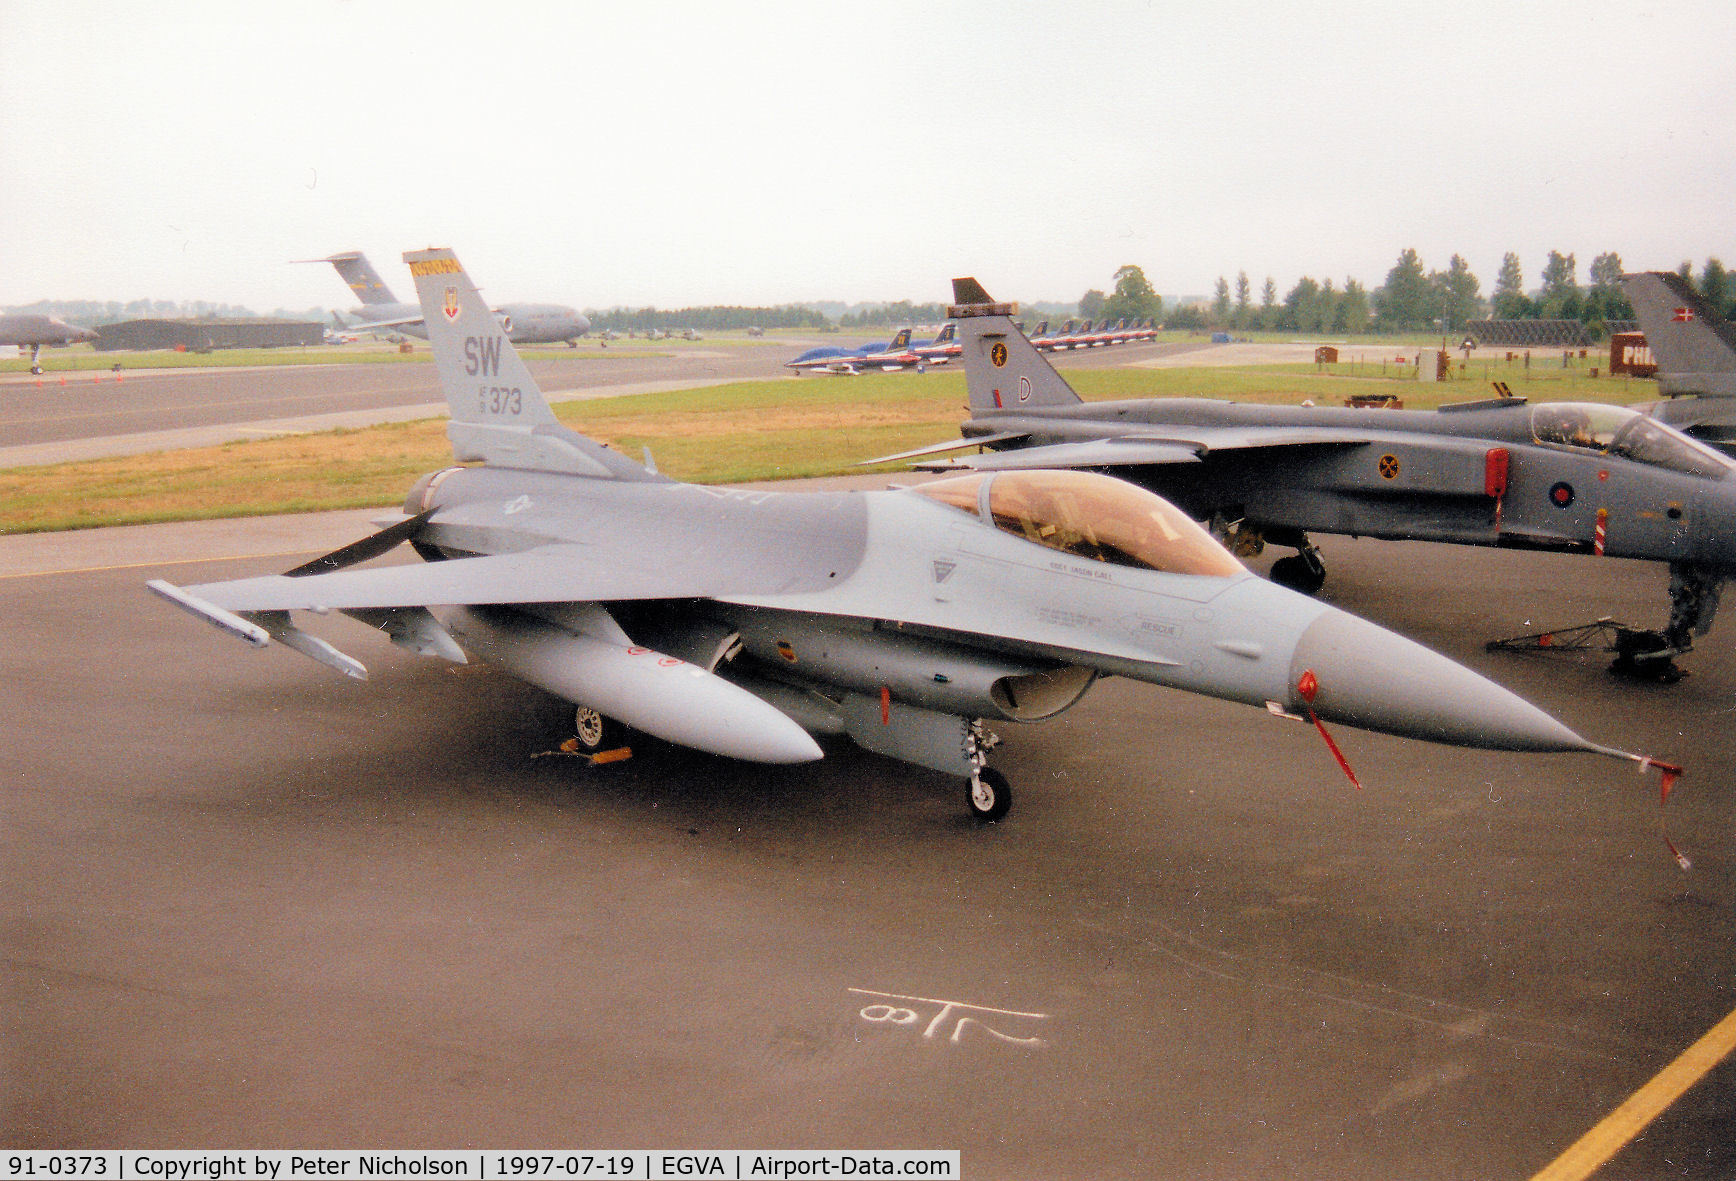 91-0373, 1991 General Dynamics F-16C Fighting Falcon C/N CC-71, F-16C Falcon, callsign Trend 64,  of Shaw AFB's 20th Fighter Wing on the flight-line at the 1997 Intnl Air Tattoo at RAF Fairford.